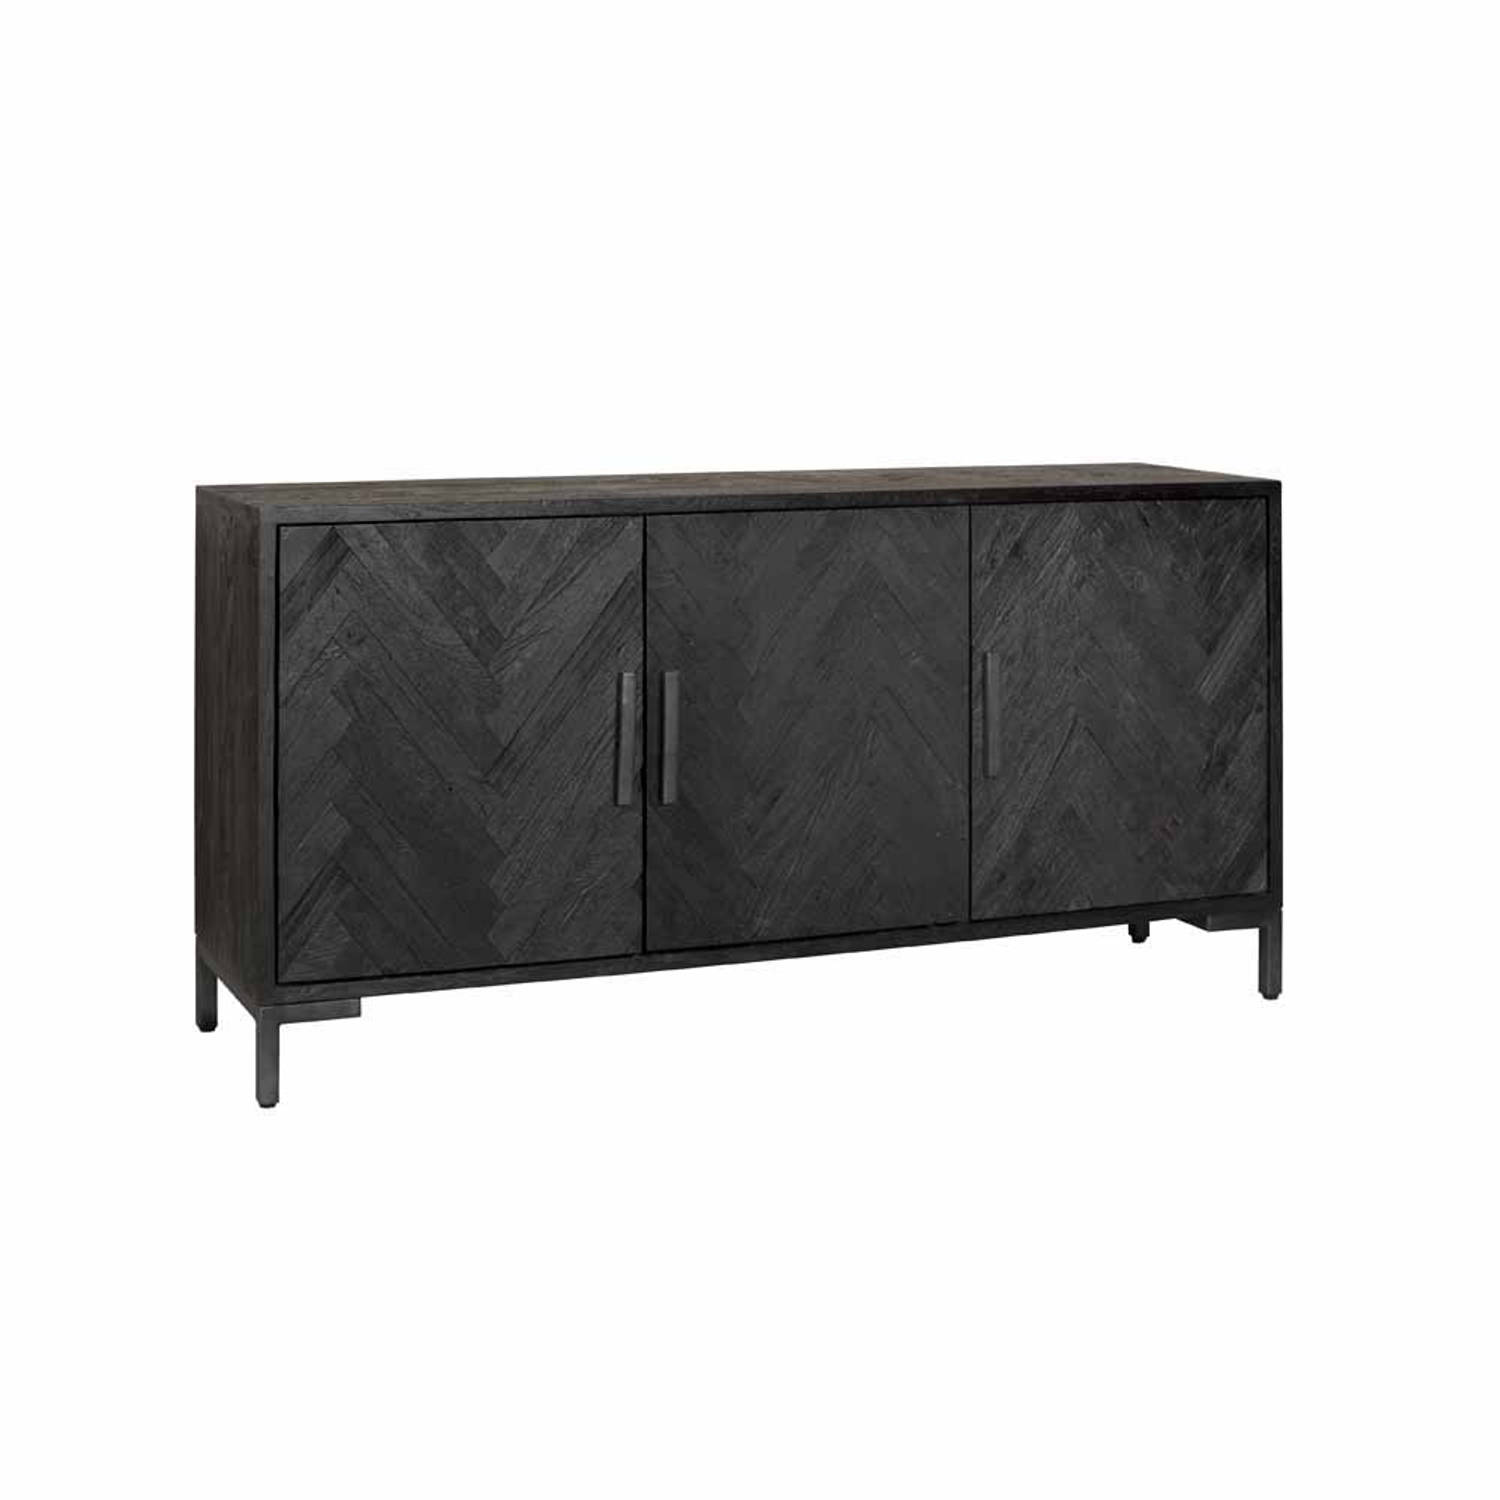 TOFF Ziano Sideboard 3 drs - 180x45x90